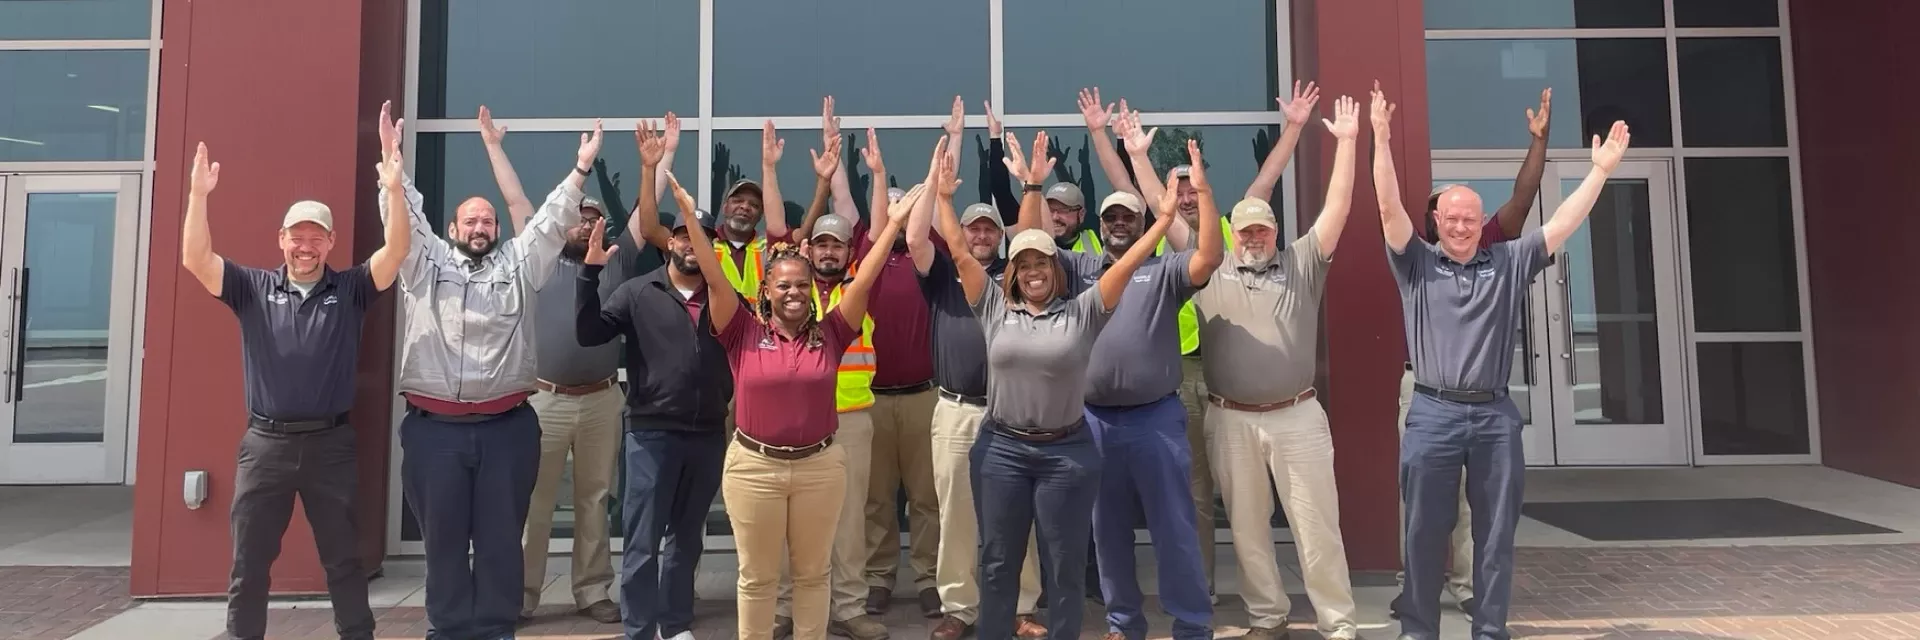 MTM Employees Who Are Part of Mazda Toyota History in North Alabama